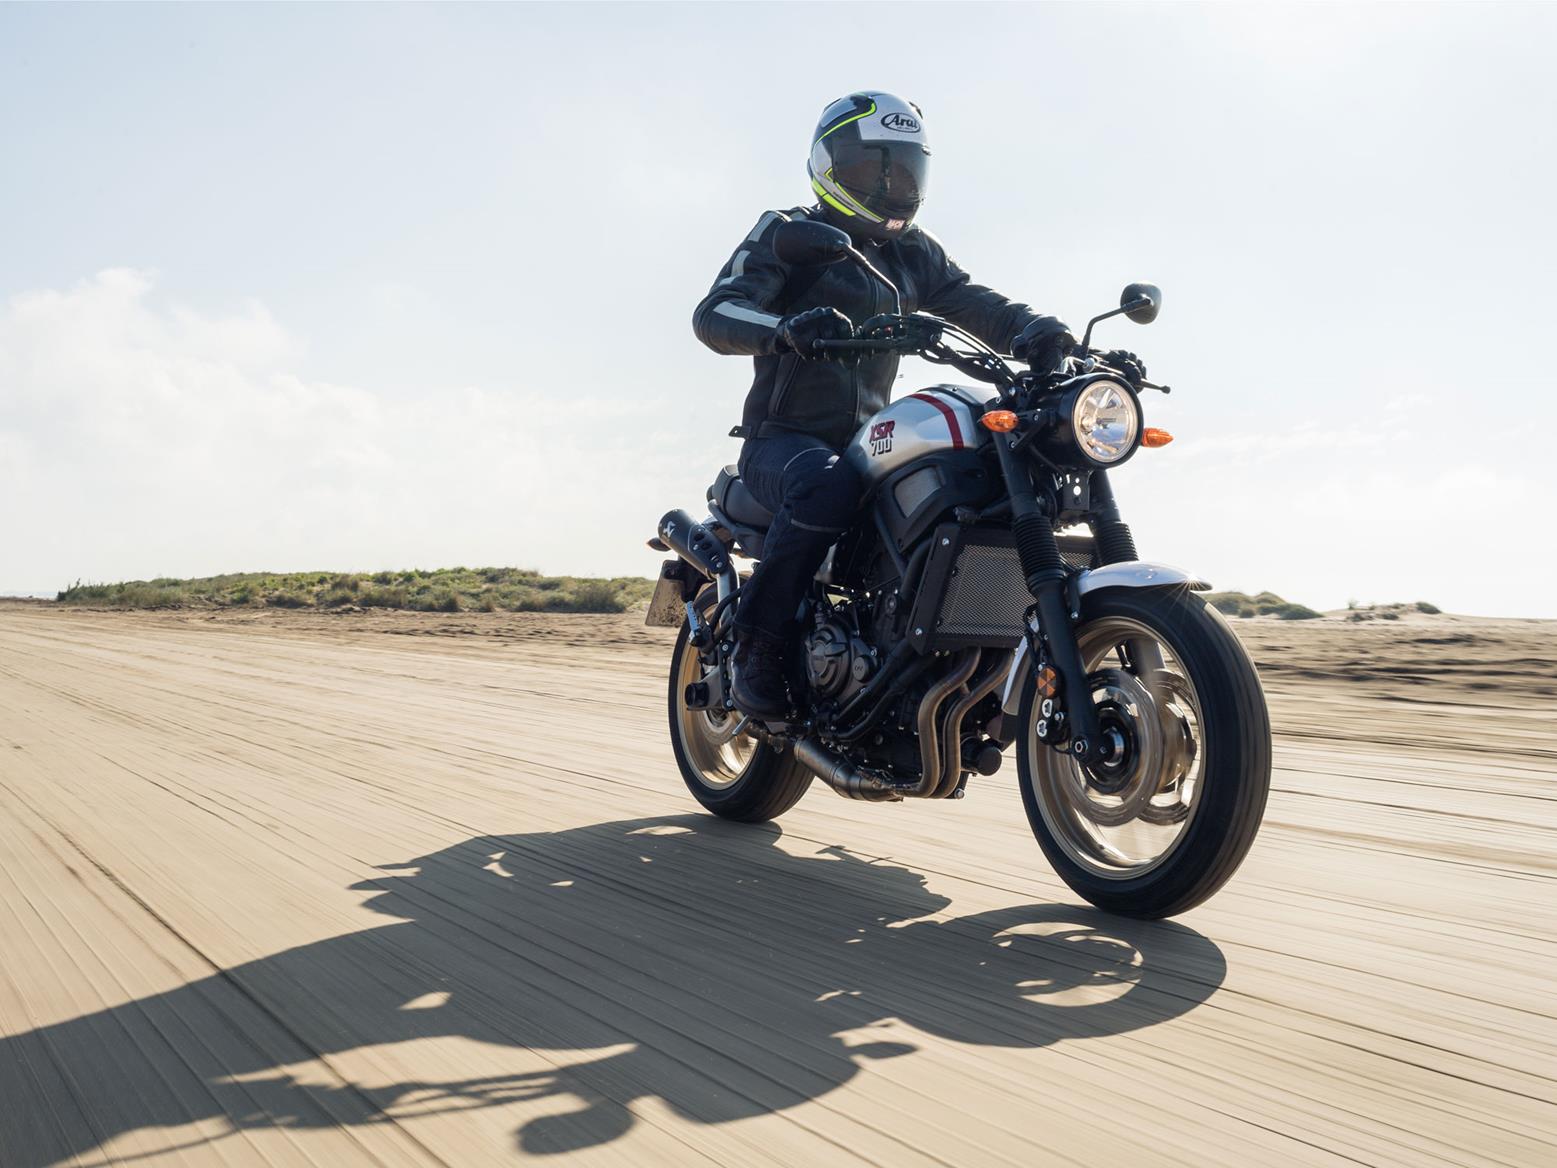 Yamaha Xsr700 Xtribite Review 2019 On Mcn Mcn